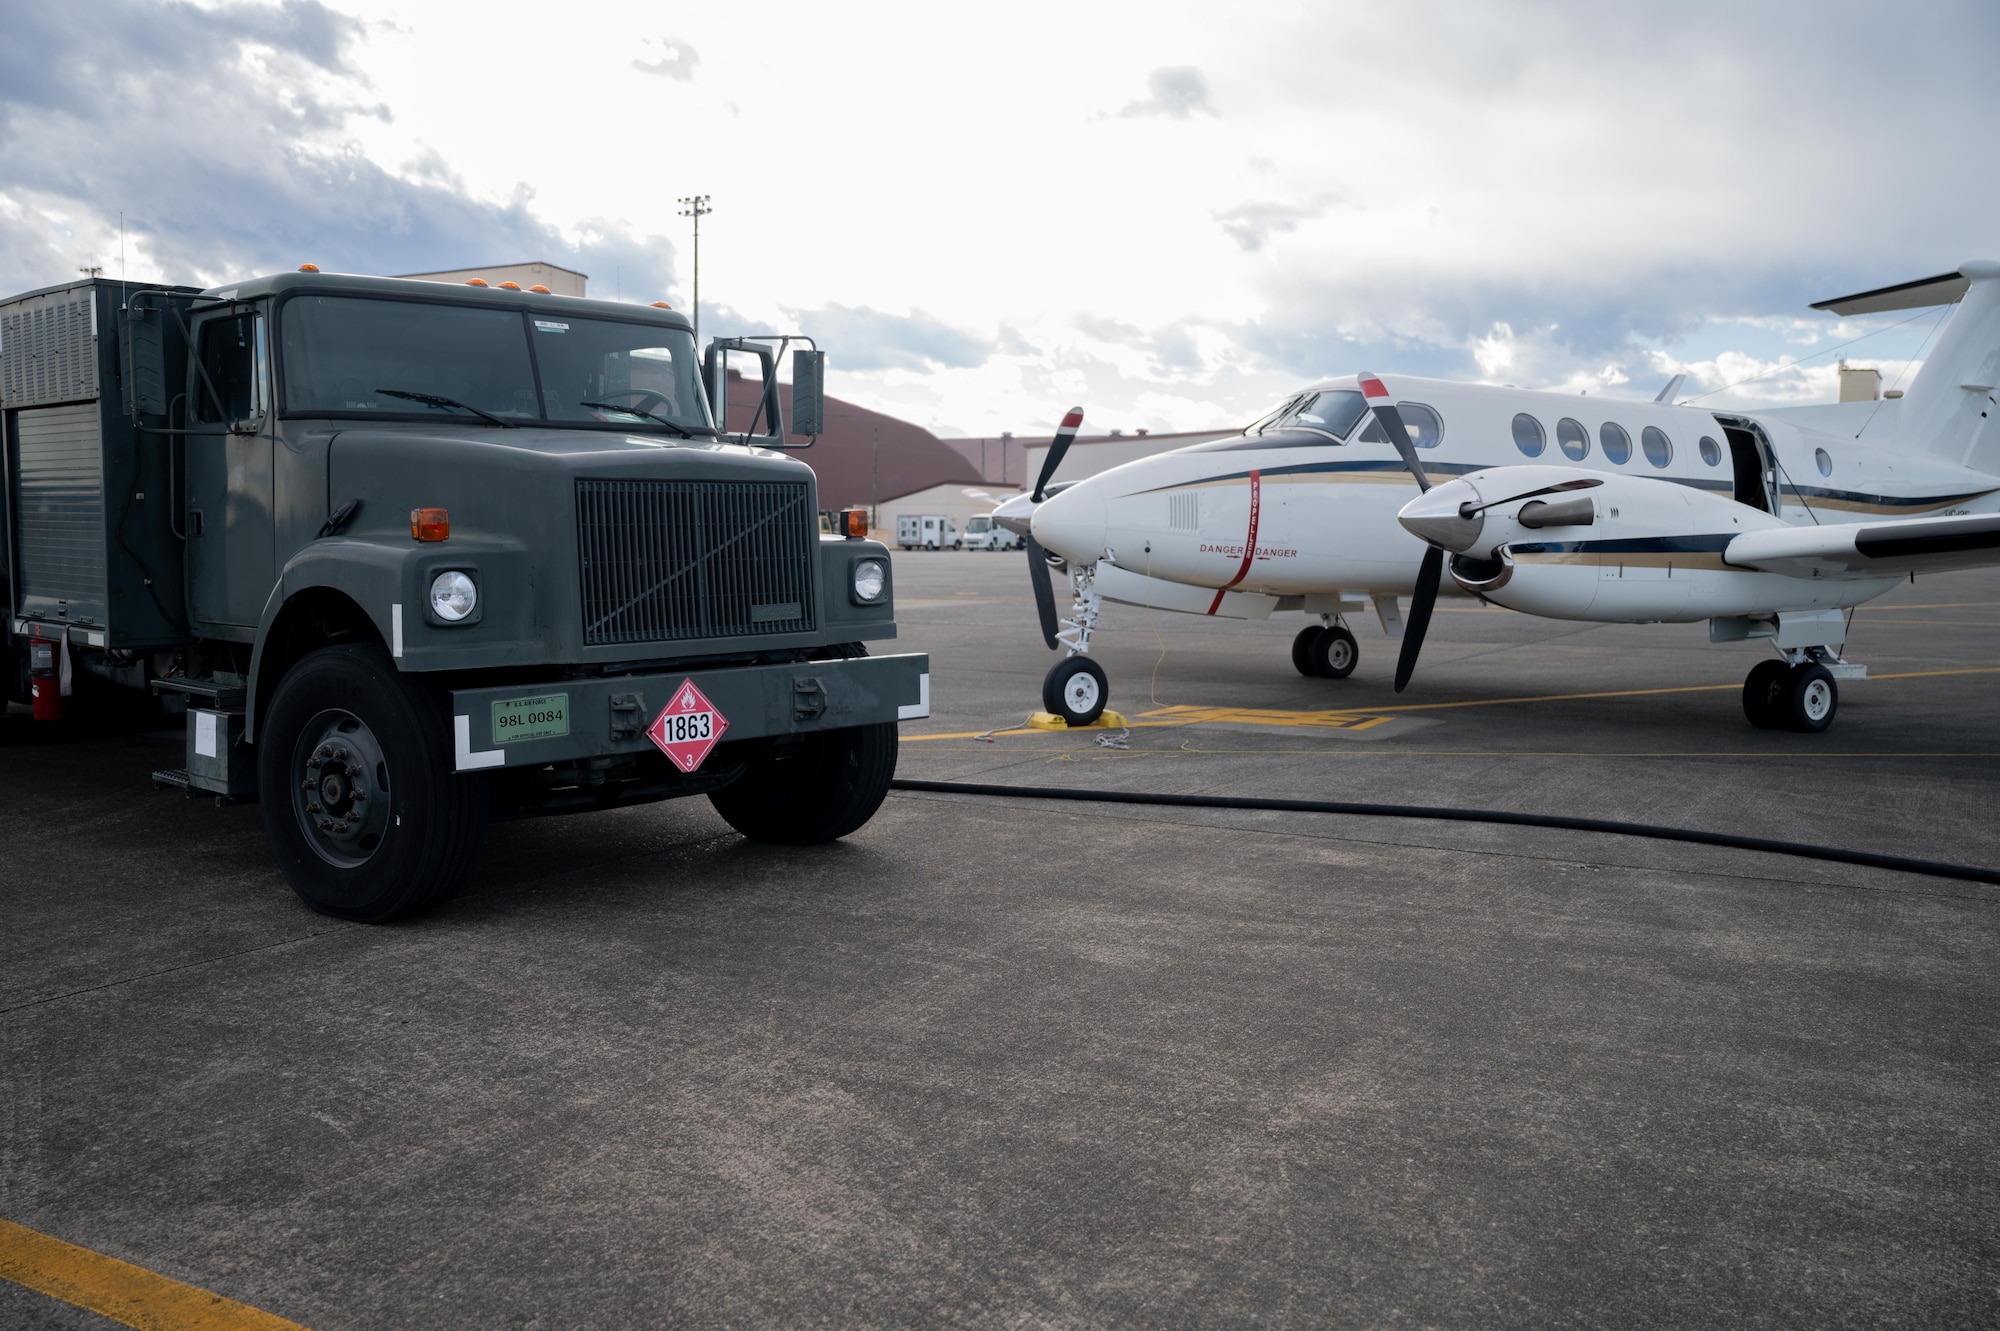 A C-12J Huron from Misawa Air Base and R11 refueling truck sit on the Flightline at Yokota Air Base